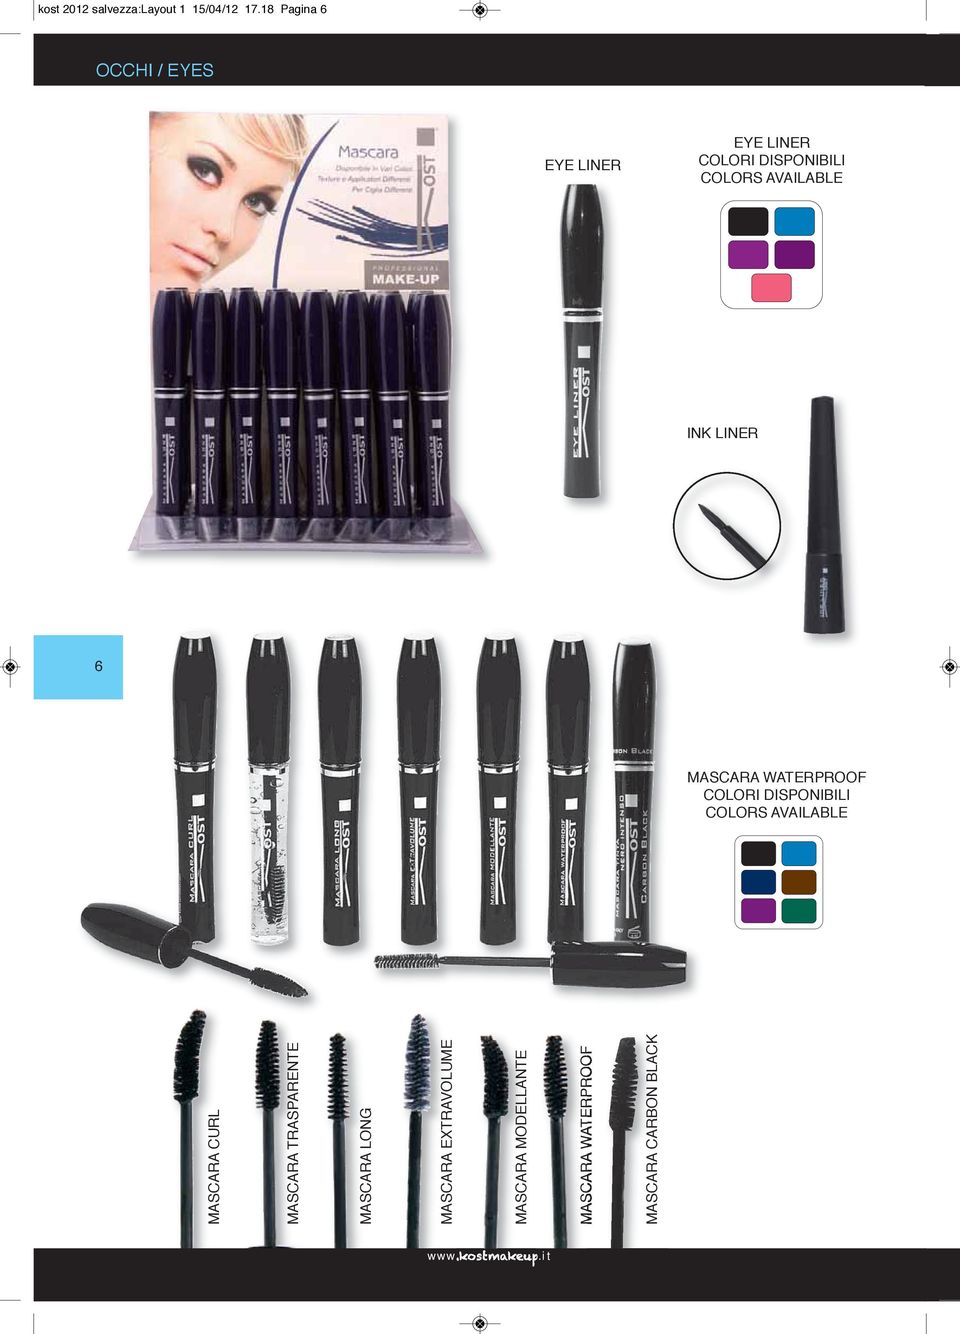 AVAILABLE INK LINER 6 MASCARA WATERPROOF COLORI DISPONIBILI COLORS AVAILABLE